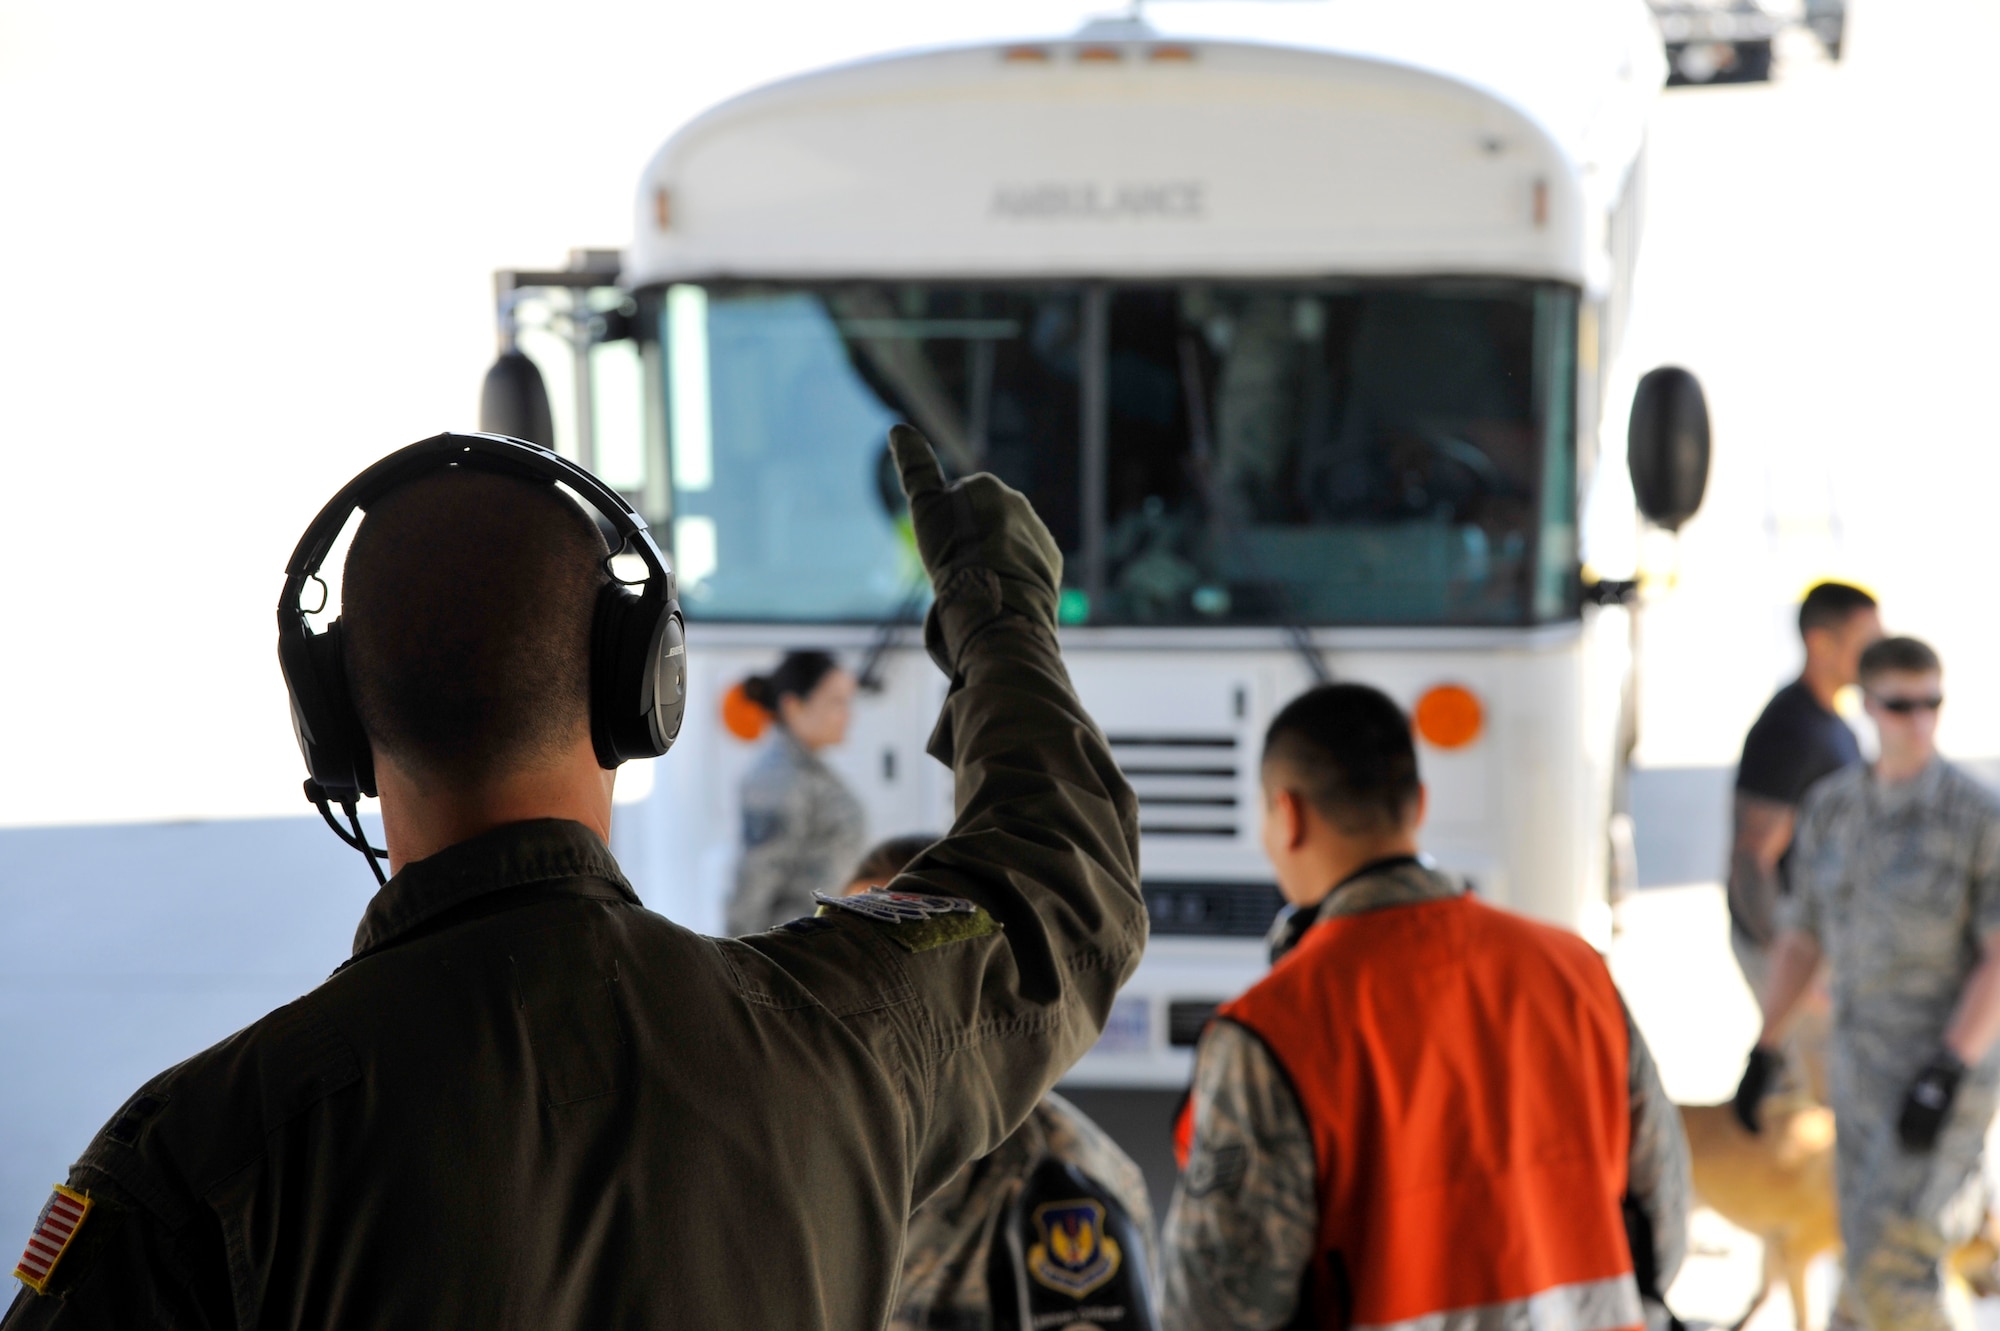 U.S. Air Force Capt. Mathew Beeman, 86th Aeromedical Evacuation Squadron standards and evaluation officer in charge, signals the start of the patient move on Ramstein Air Base, Germany, July 13, 2017. Serving United States European Command, United States Central Command, and United States Africa Command patients, the En-Route Patient Staging Facility personnel perform approximately two to 10 patient moves weekly. (U.S. Air Force photo by Airman 1st Class D. Blake Browning)